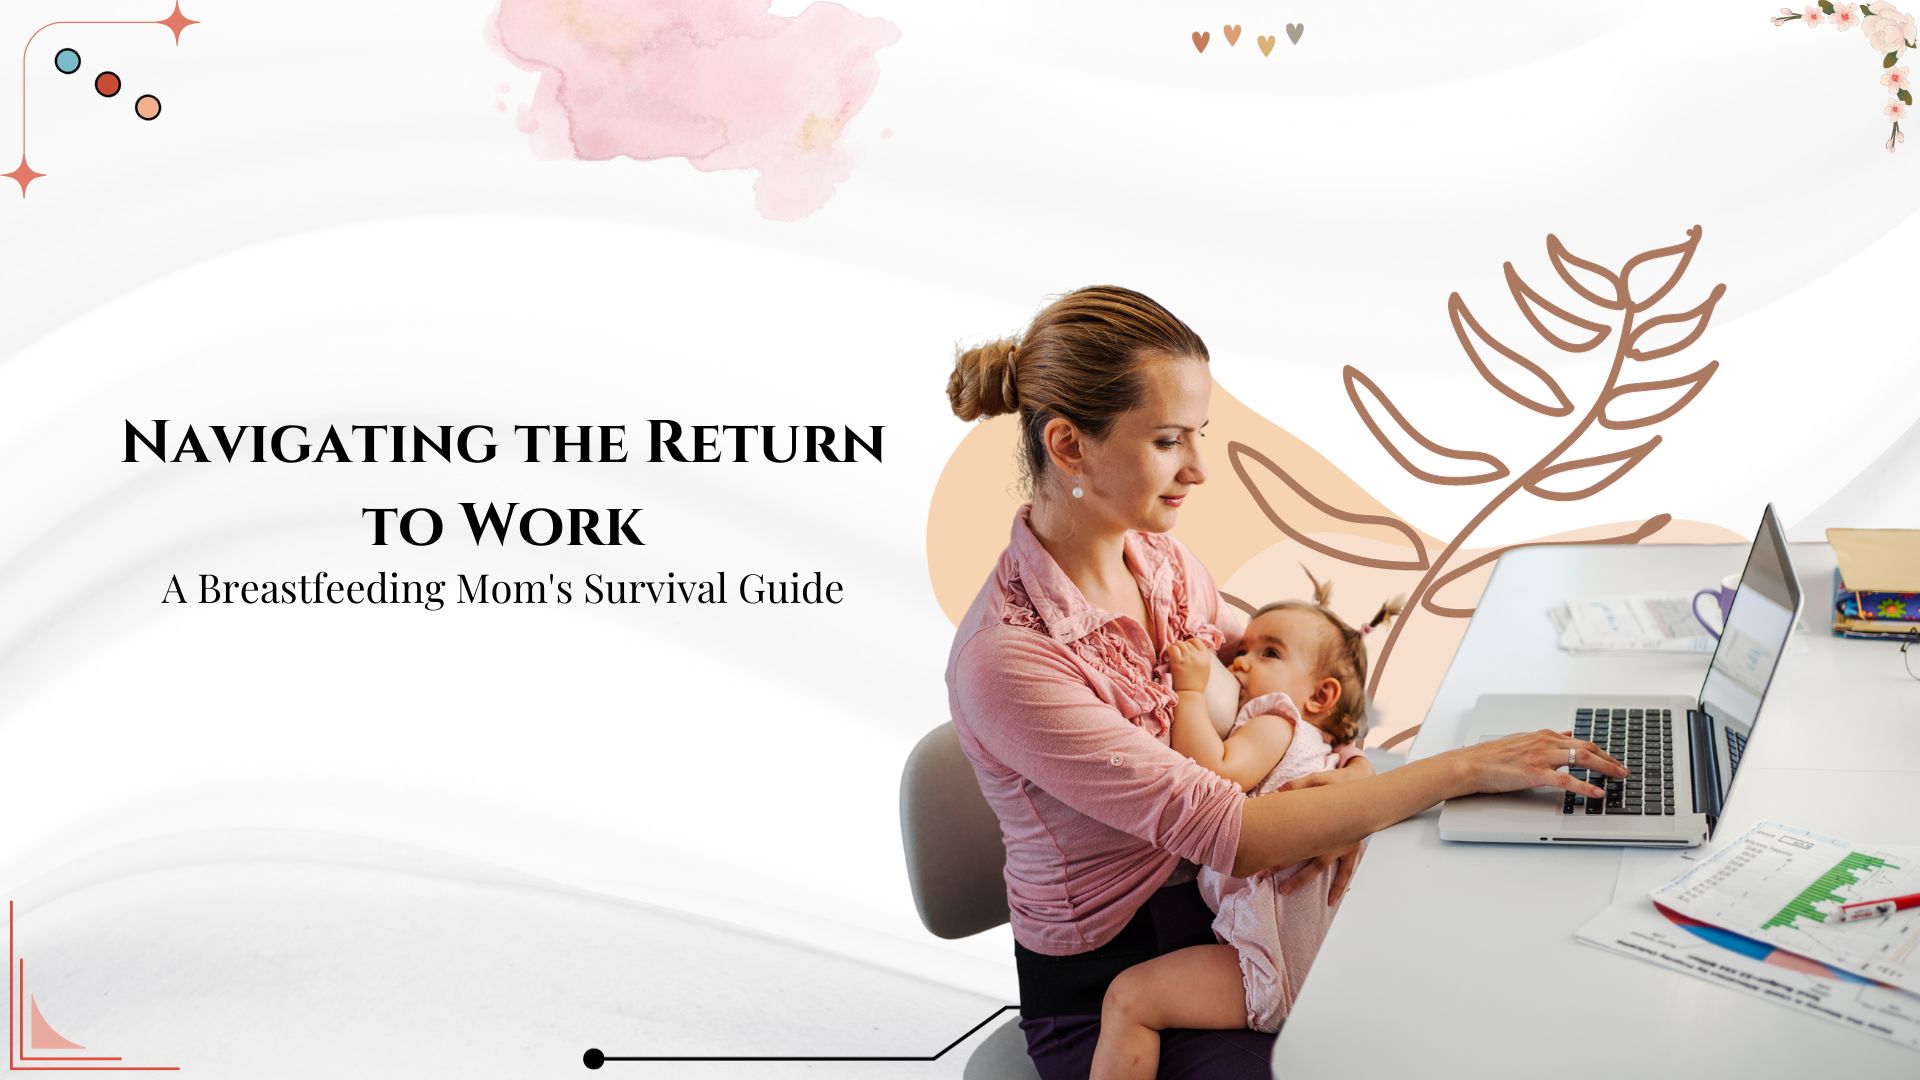 Navigating the Return to Work: A Breastfeeding Mom's Survival Guide